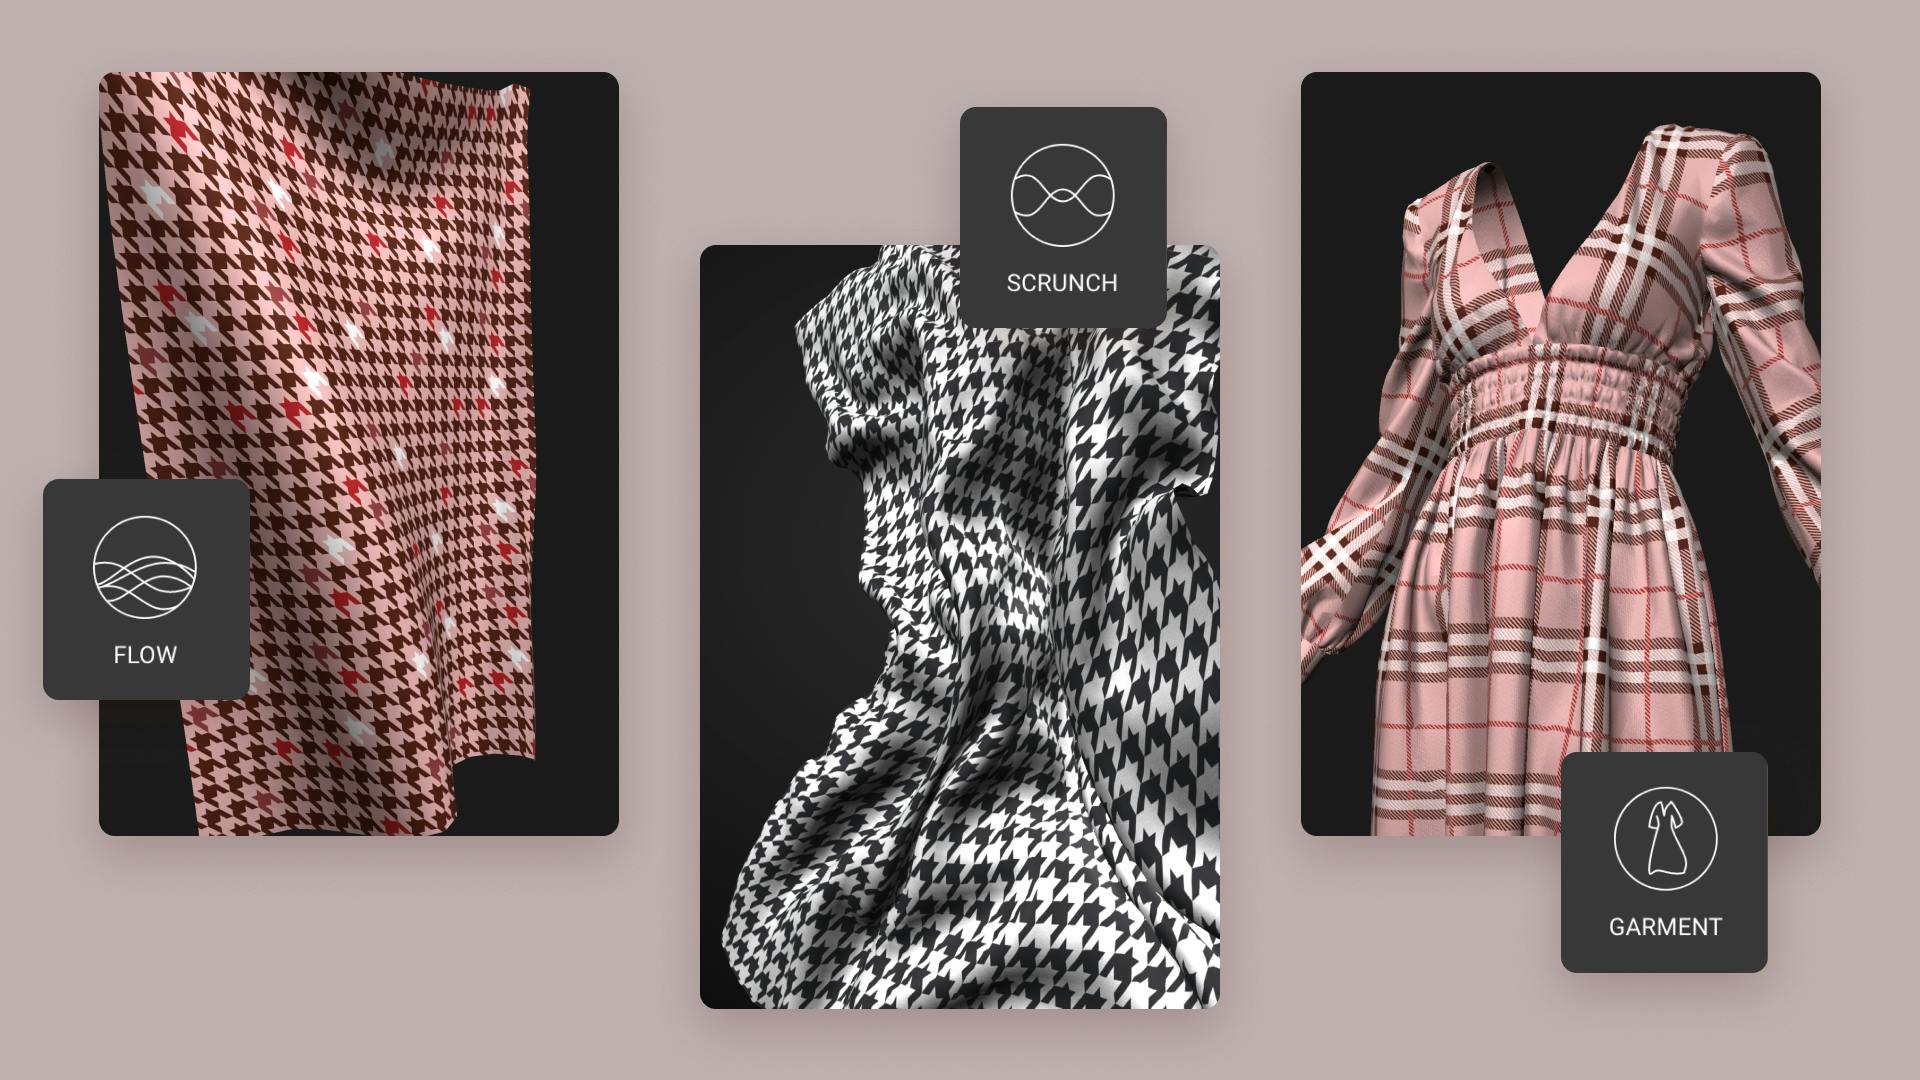 Swatch Editor — A digital product enabling textile pattern designers to do business during lockdown.